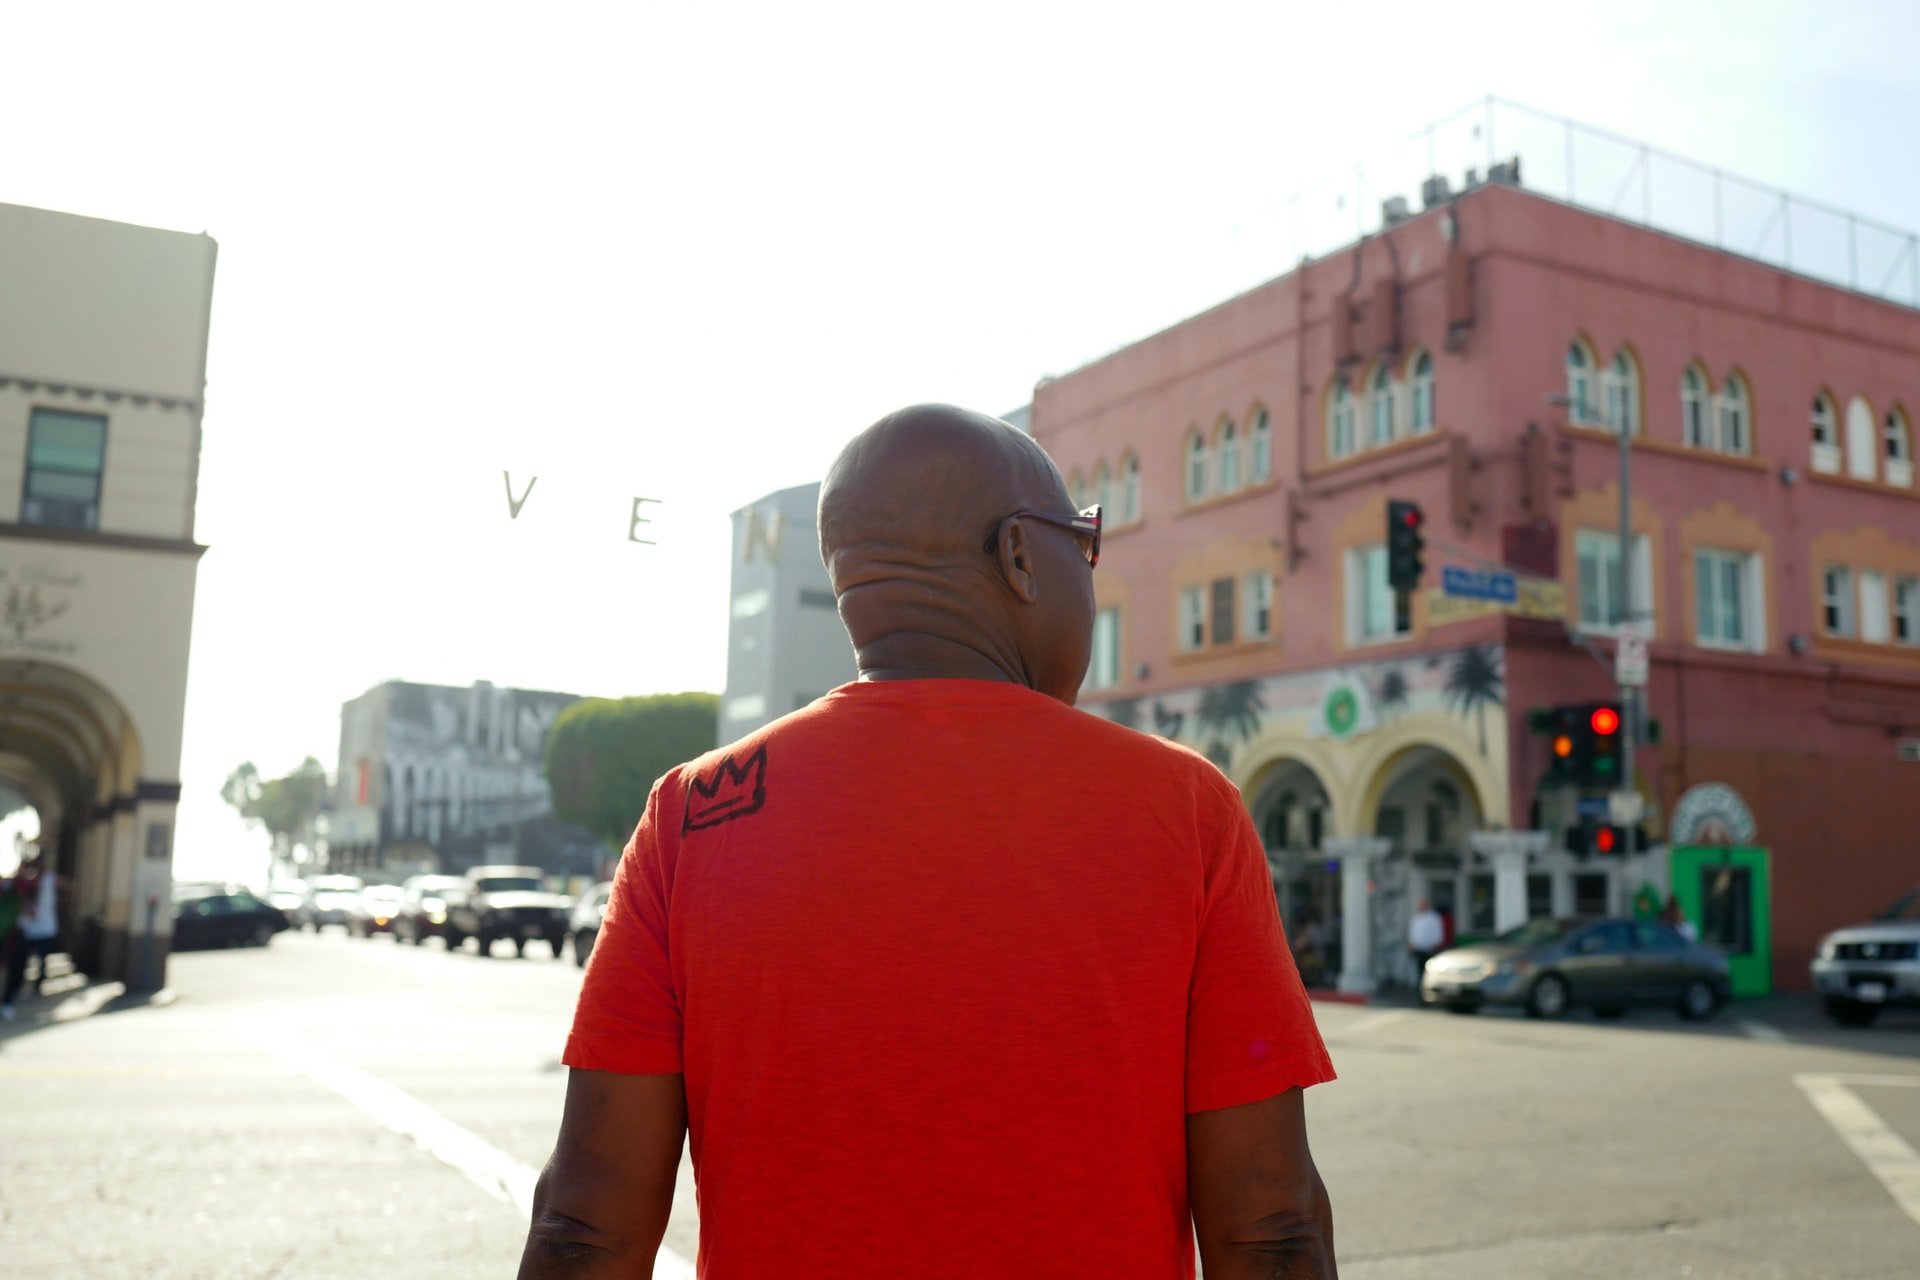 It was a bald guy in a red shirt | Source: Unsplash